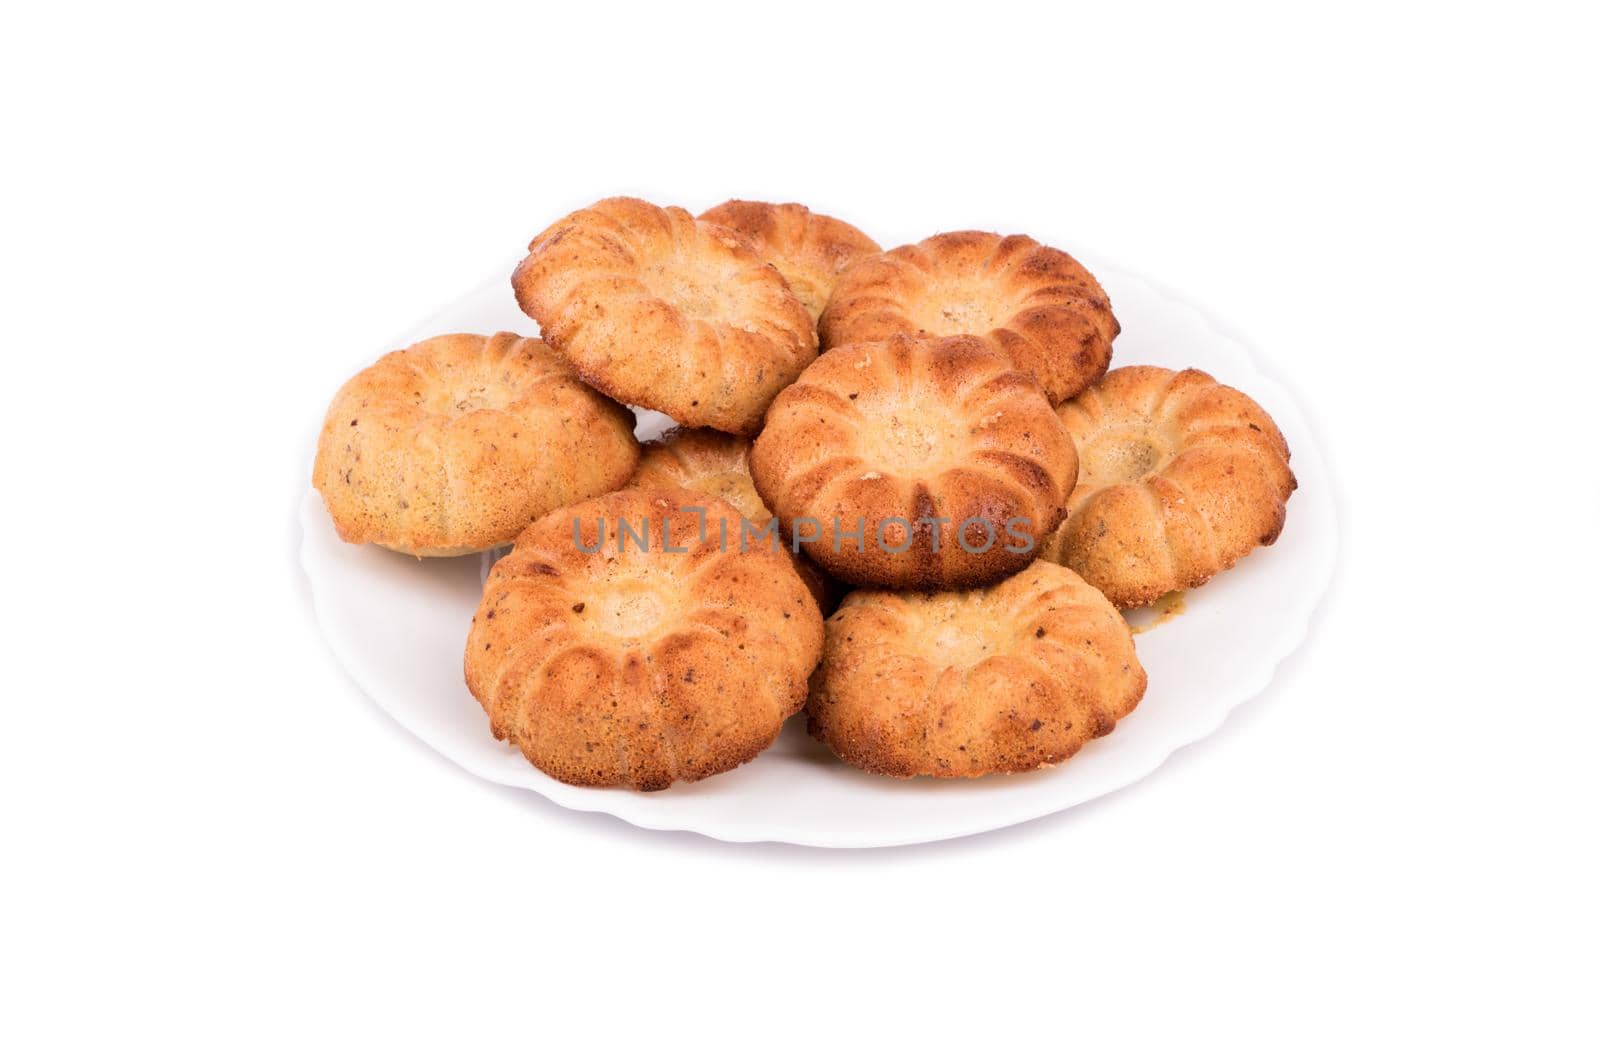 Homemade fresh baked cookies on a plate on a white background